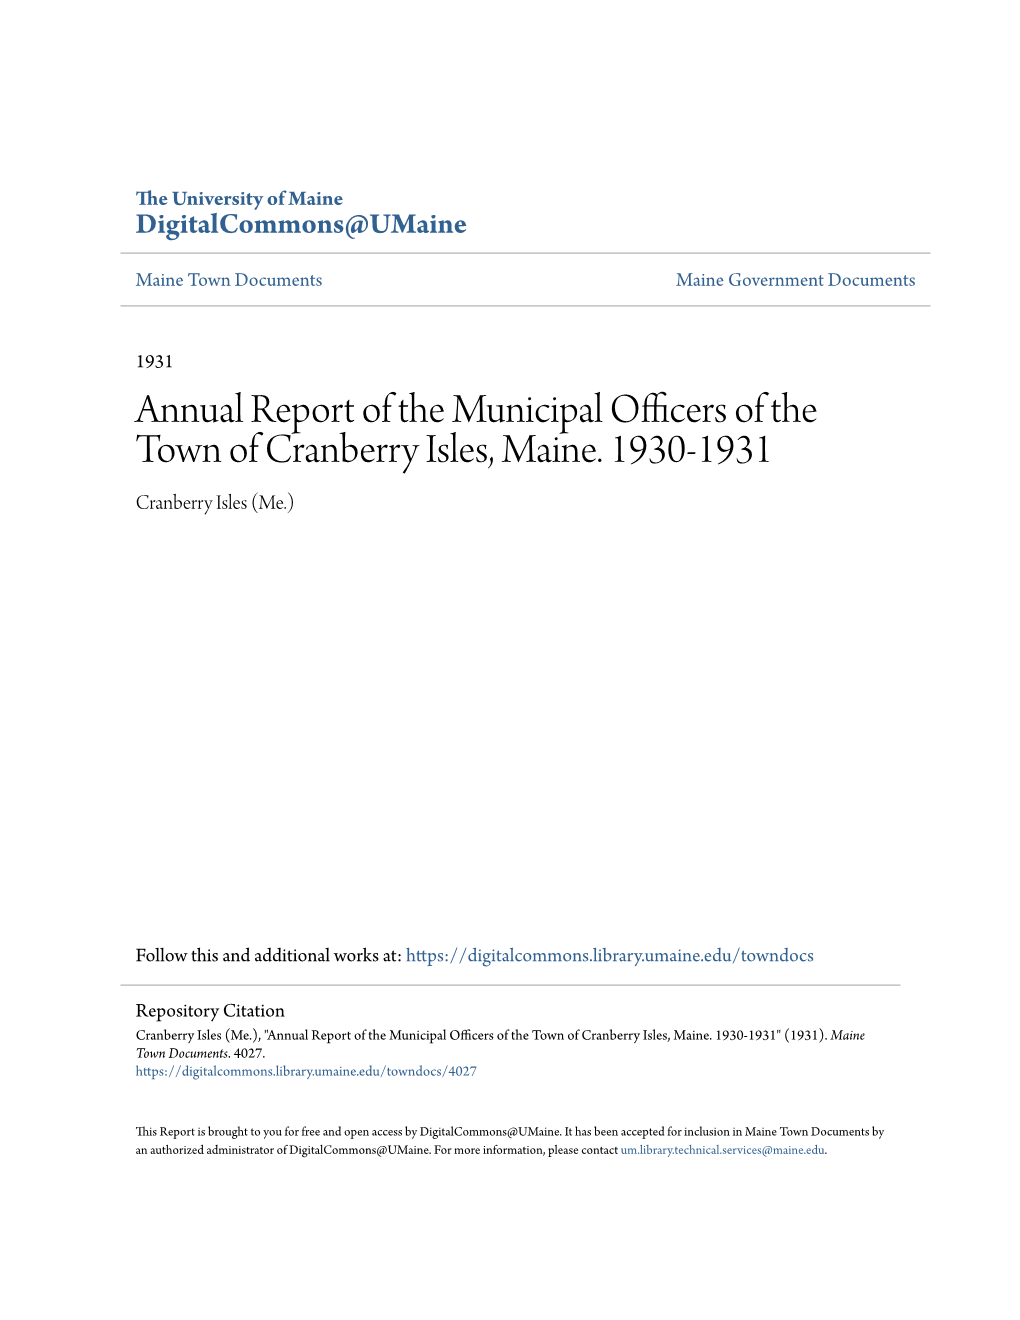 Annual Report of the Municipal Officers of the Town of Cranberry Isles, Maine. 1930-1931 Cranberry Isles (Me.)